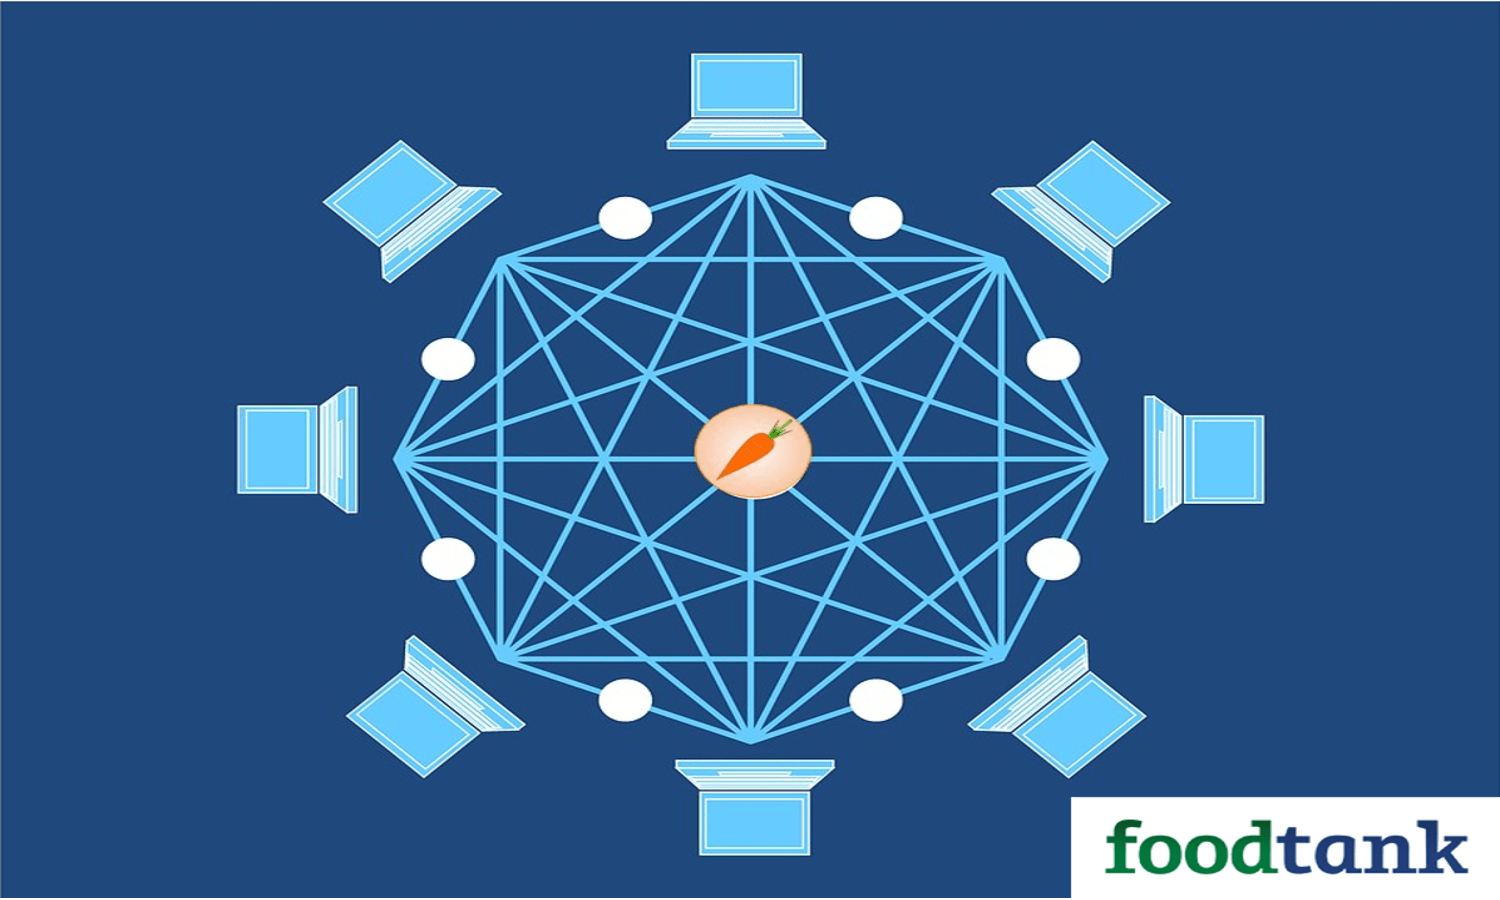 Initially thought of as a tool for banking, blockchain technology has continued to develop and new research shows it can increase sustainability, efficiency, and transparency in the food system.